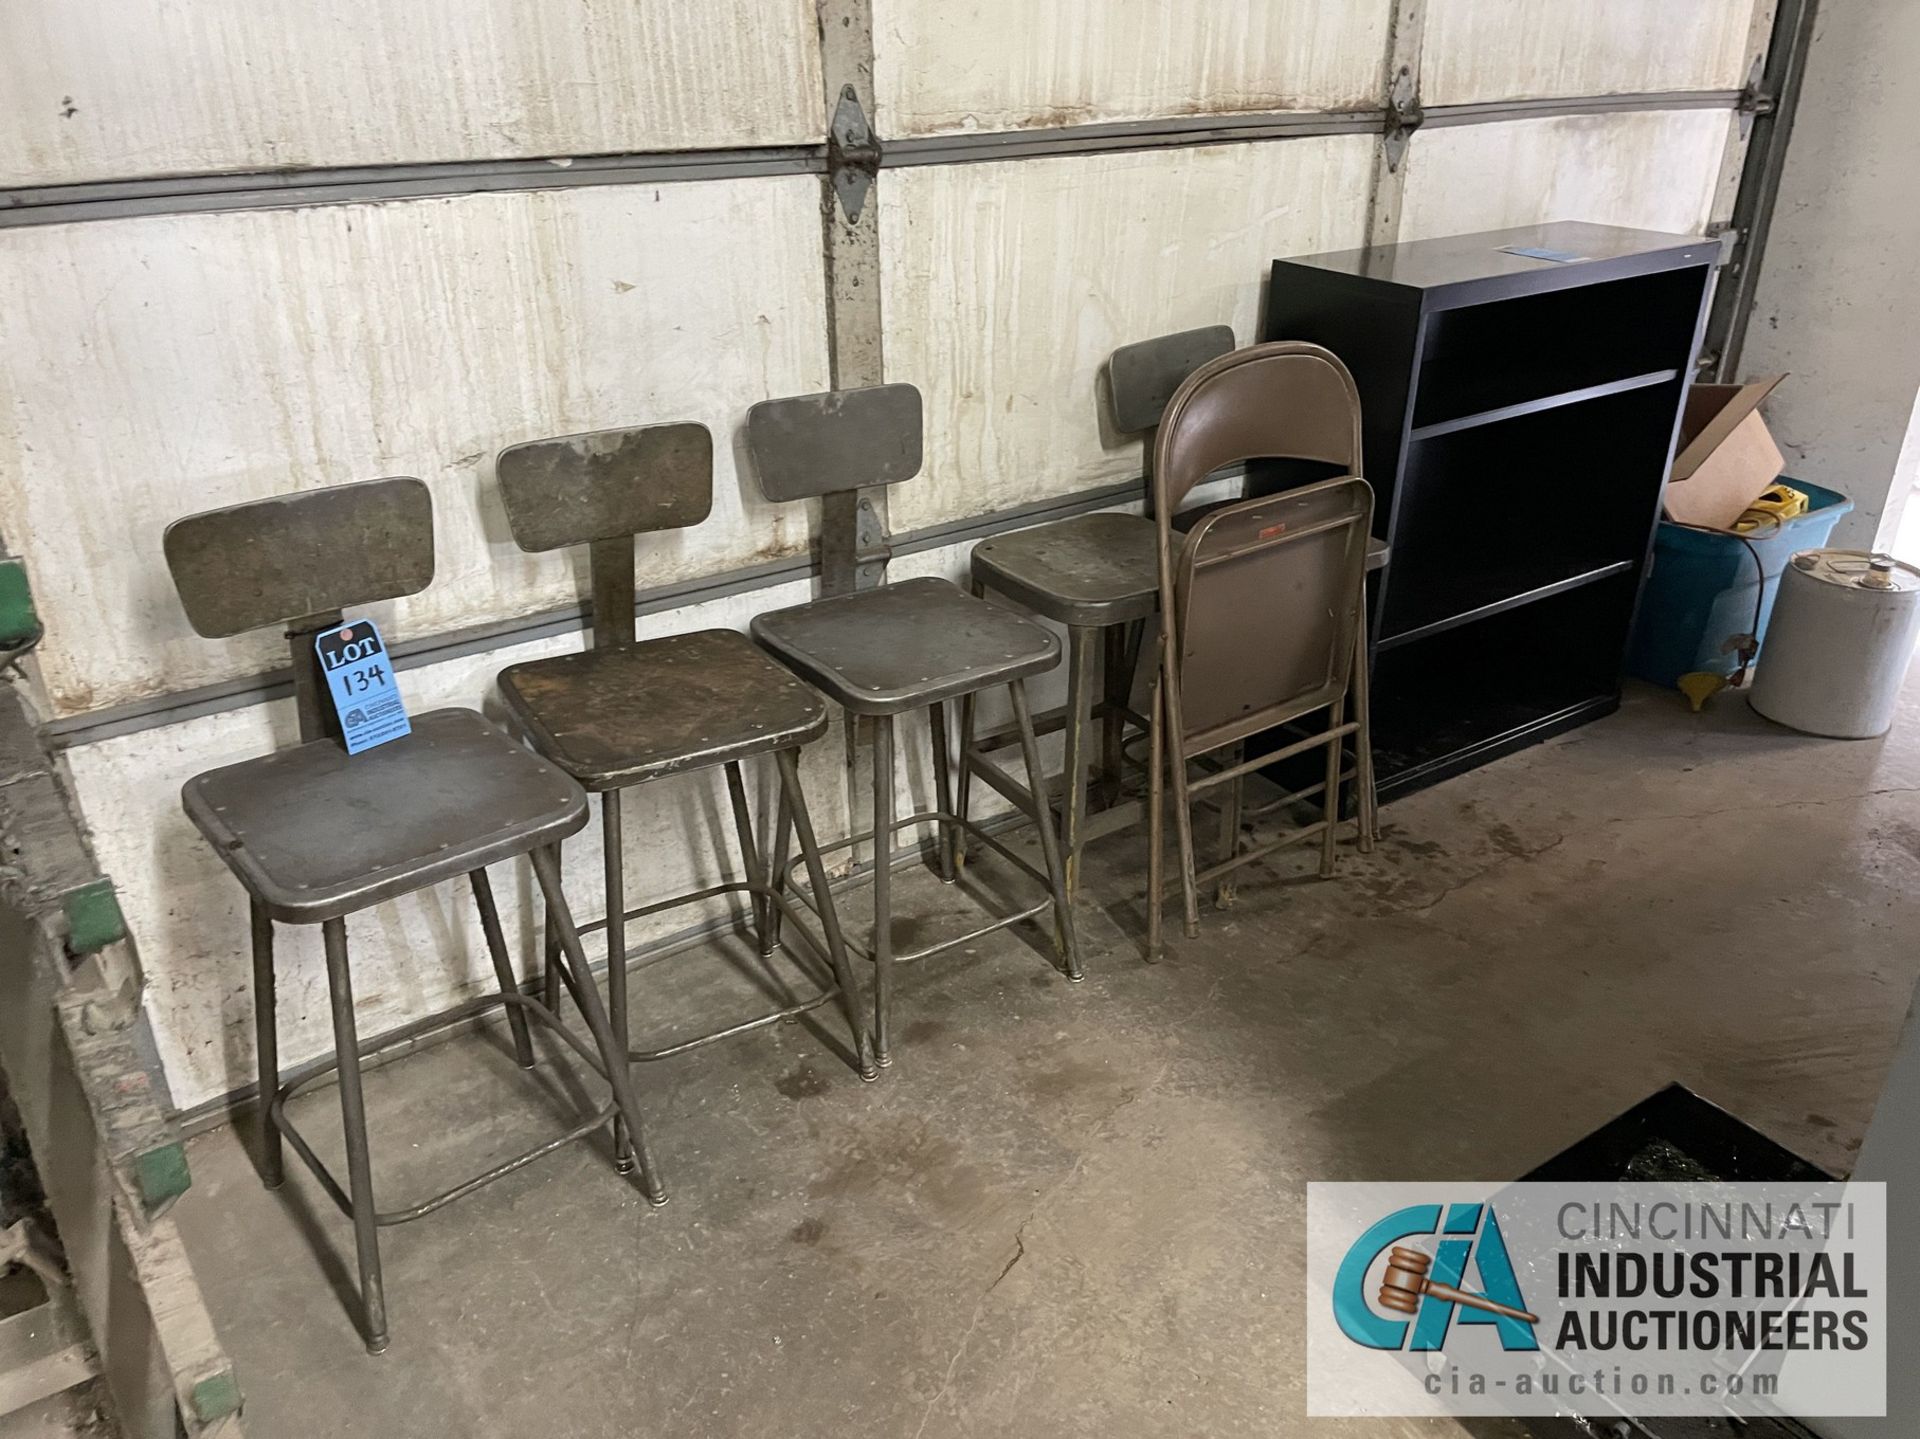 (LOT) SHOP CHAIRS WITH (2) METAL BOOKCASES - (1) LOCATED BY LOT 15